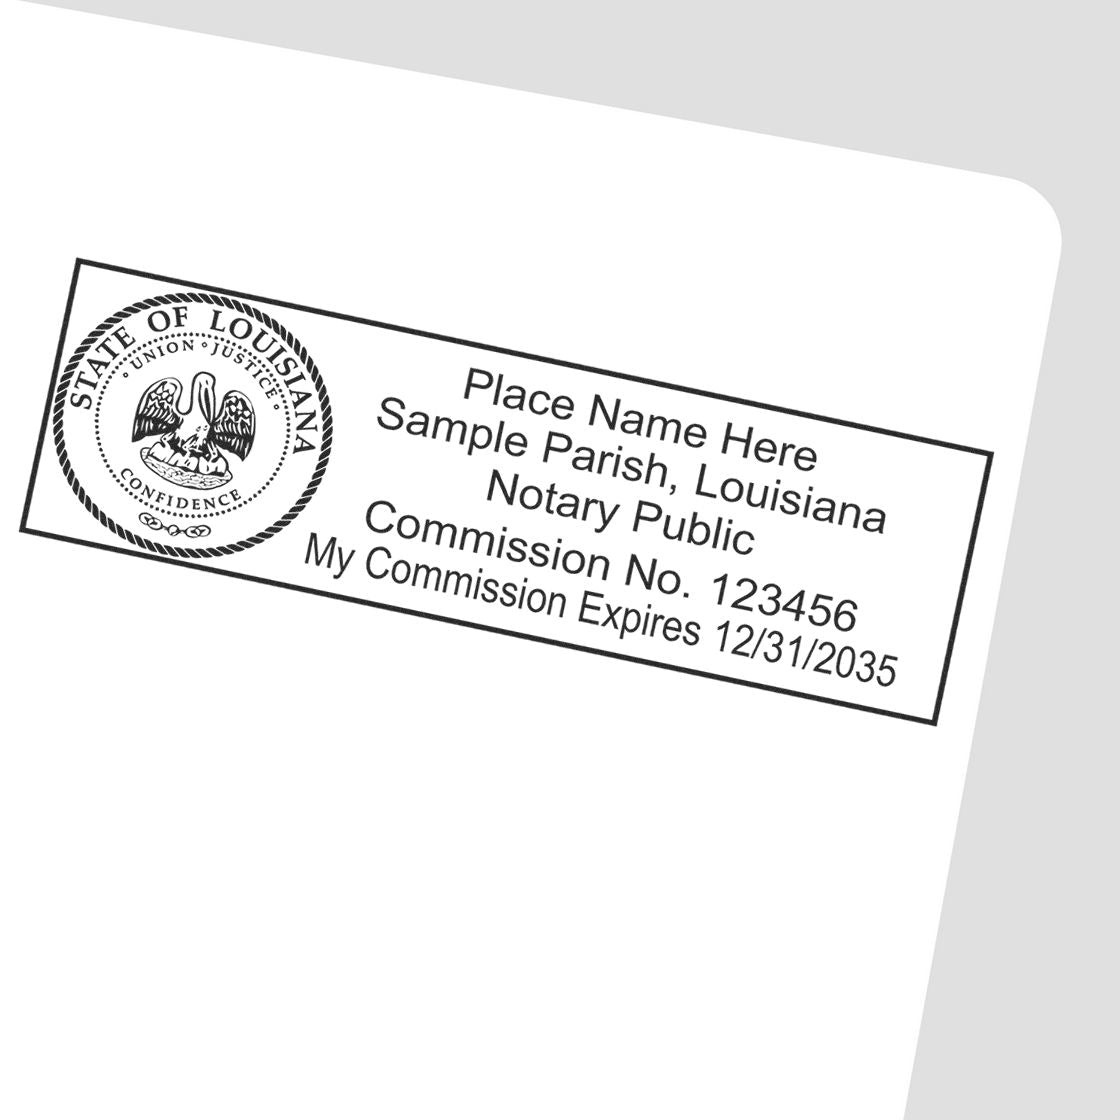 The main image for the MaxLight Premium Pre-Inked Louisiana State Seal Notarial Stamp depicting a sample of the imprint and electronic files